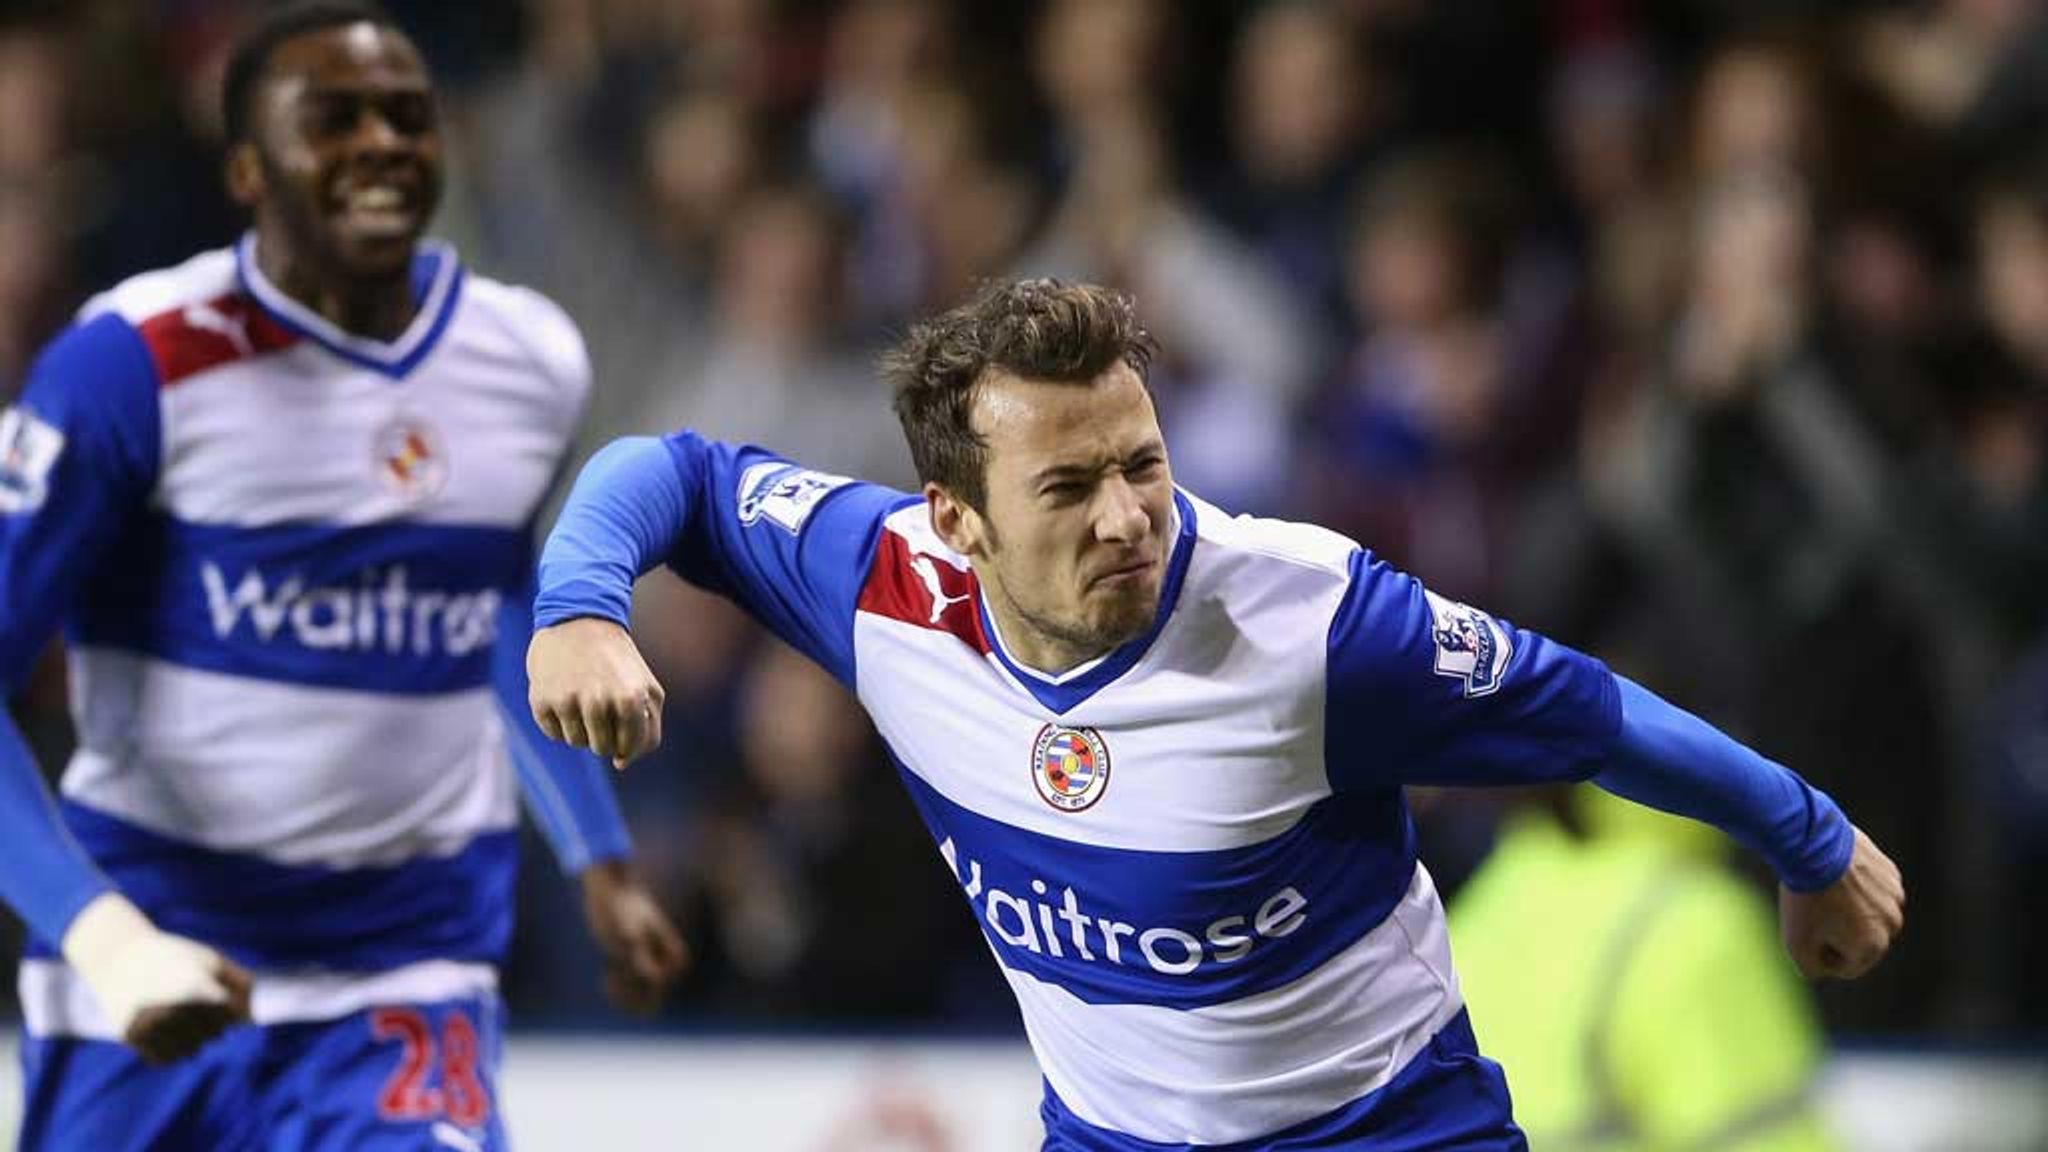 Reading striker Adam Le Fondre tipped to play for England | Football News |  Sky Sports